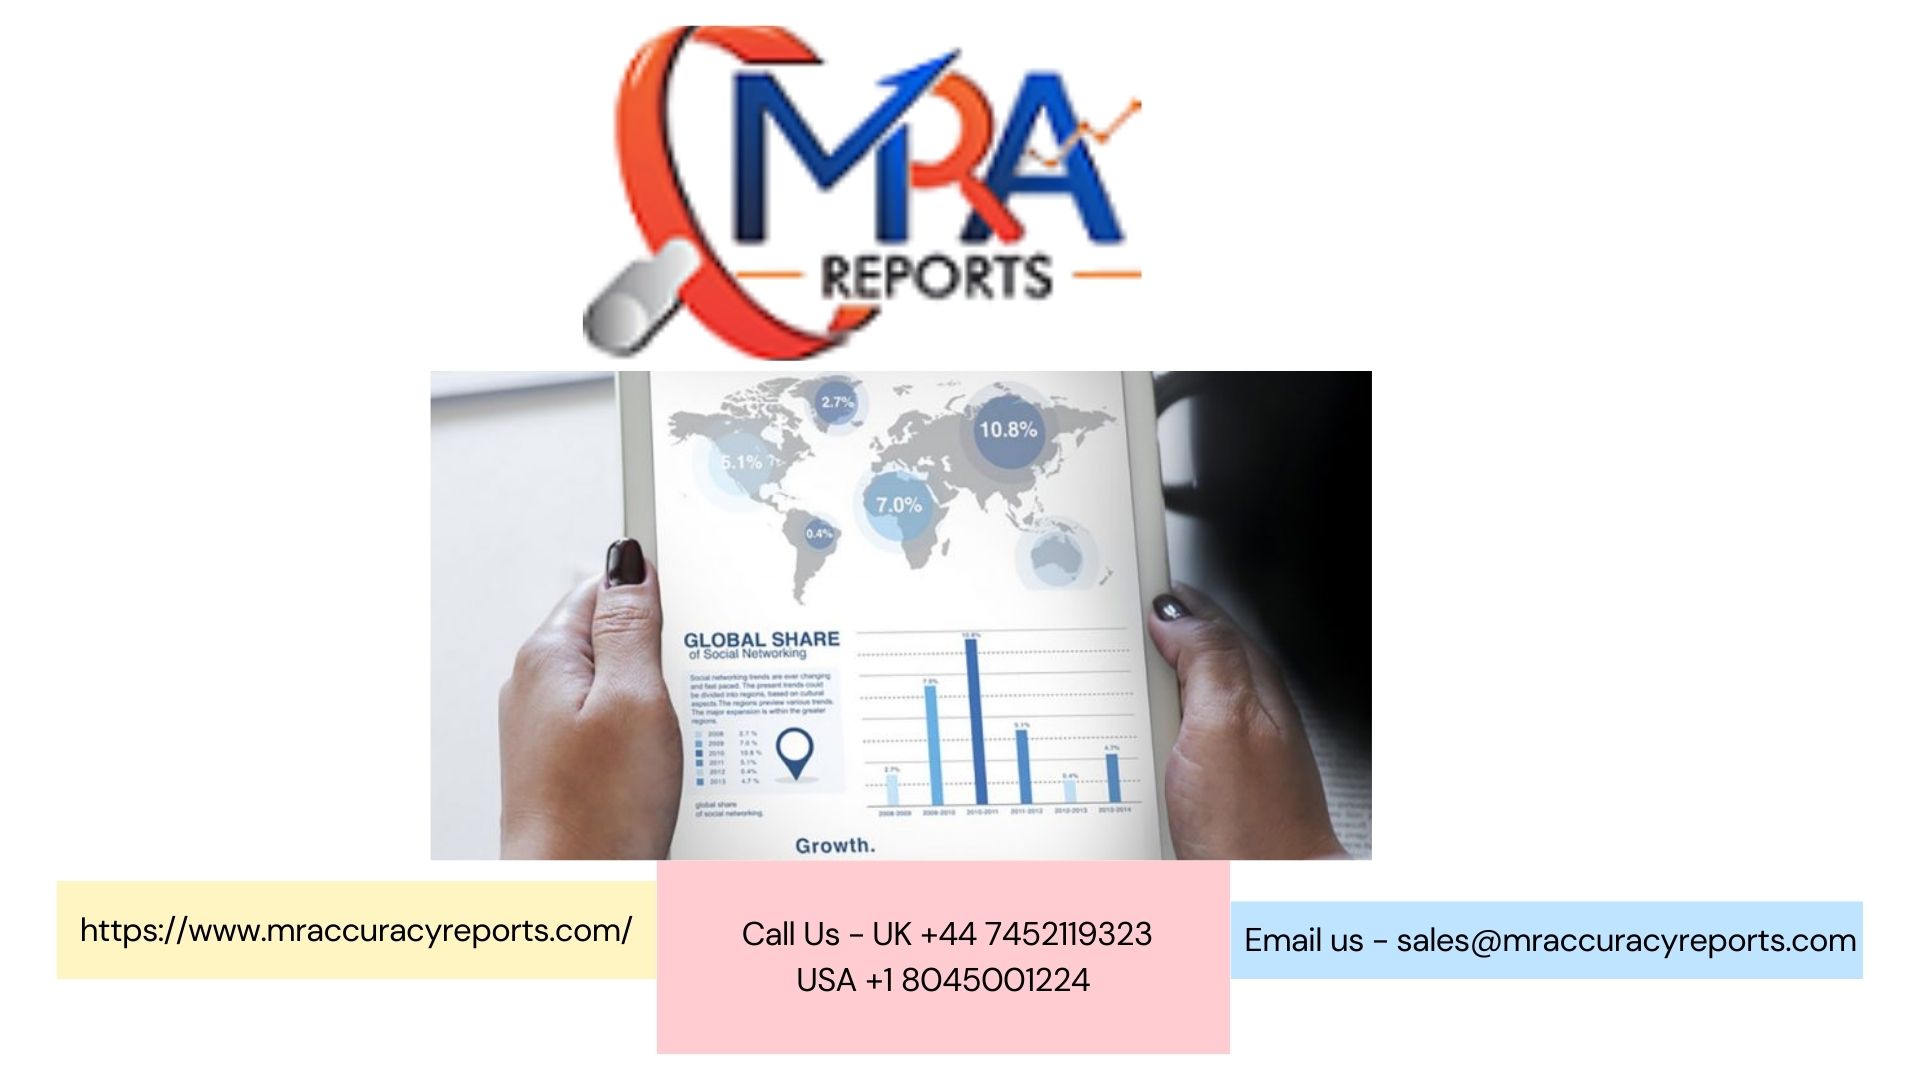 Emotion Recognition and Sentiment Analysis Market Growing Rapidly by-[24]7.ai, Adoreboard, Affectiva, Amazon, Aspect Sof